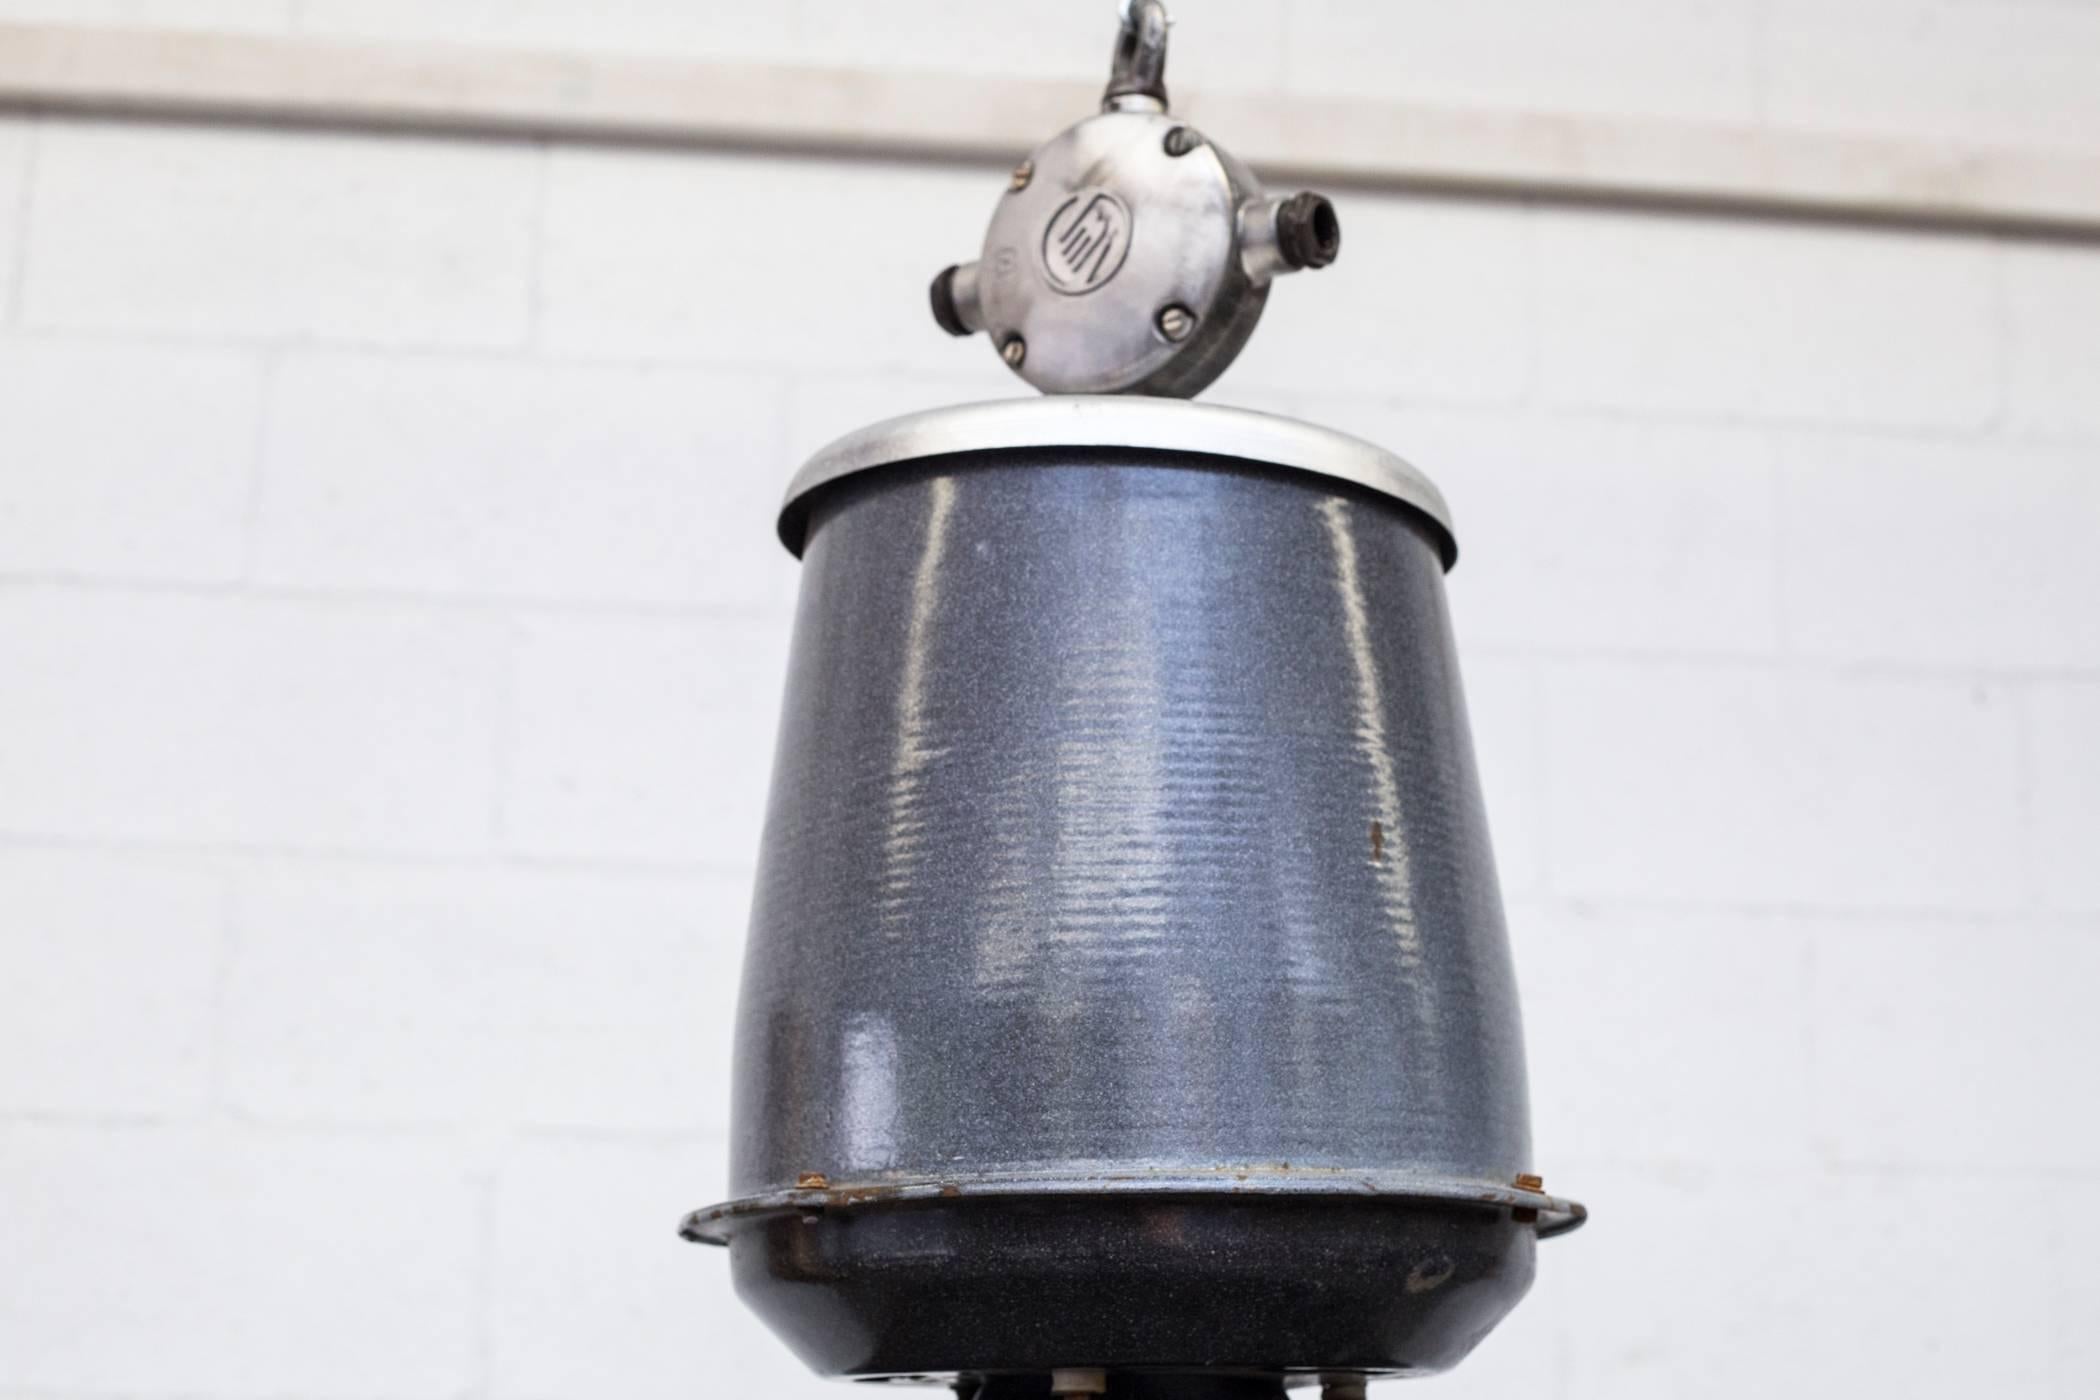 Gorgeous industrial enameled factory ceiling lamps. Speckled grey tops with dark charcoal shades and white enameled interior. All in original condition with visible wear and minimal chipping consistent with their age and usage. Other similar color